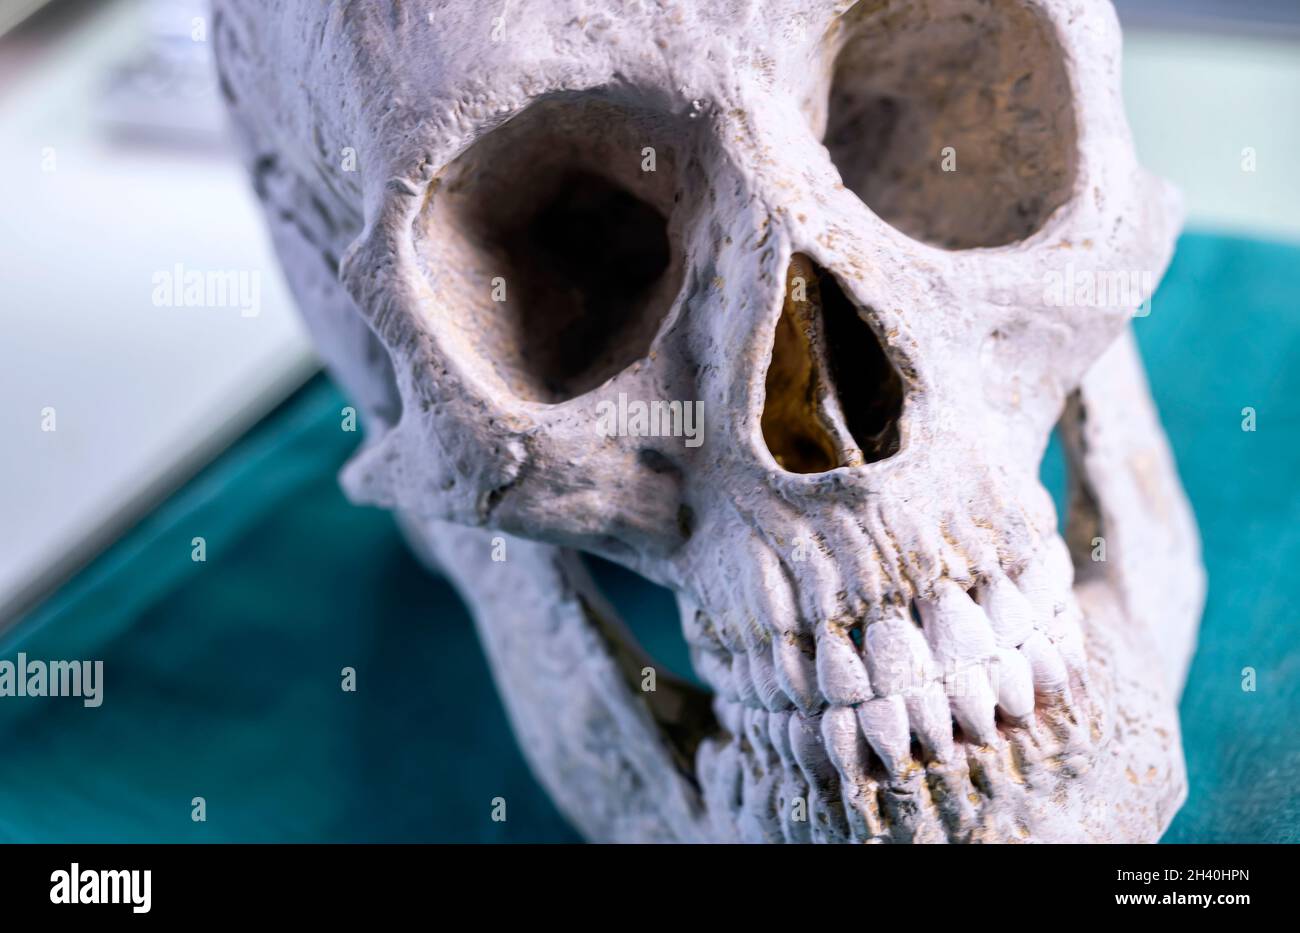 Detail of adult skull in a crime lab, concept image Stock Photo